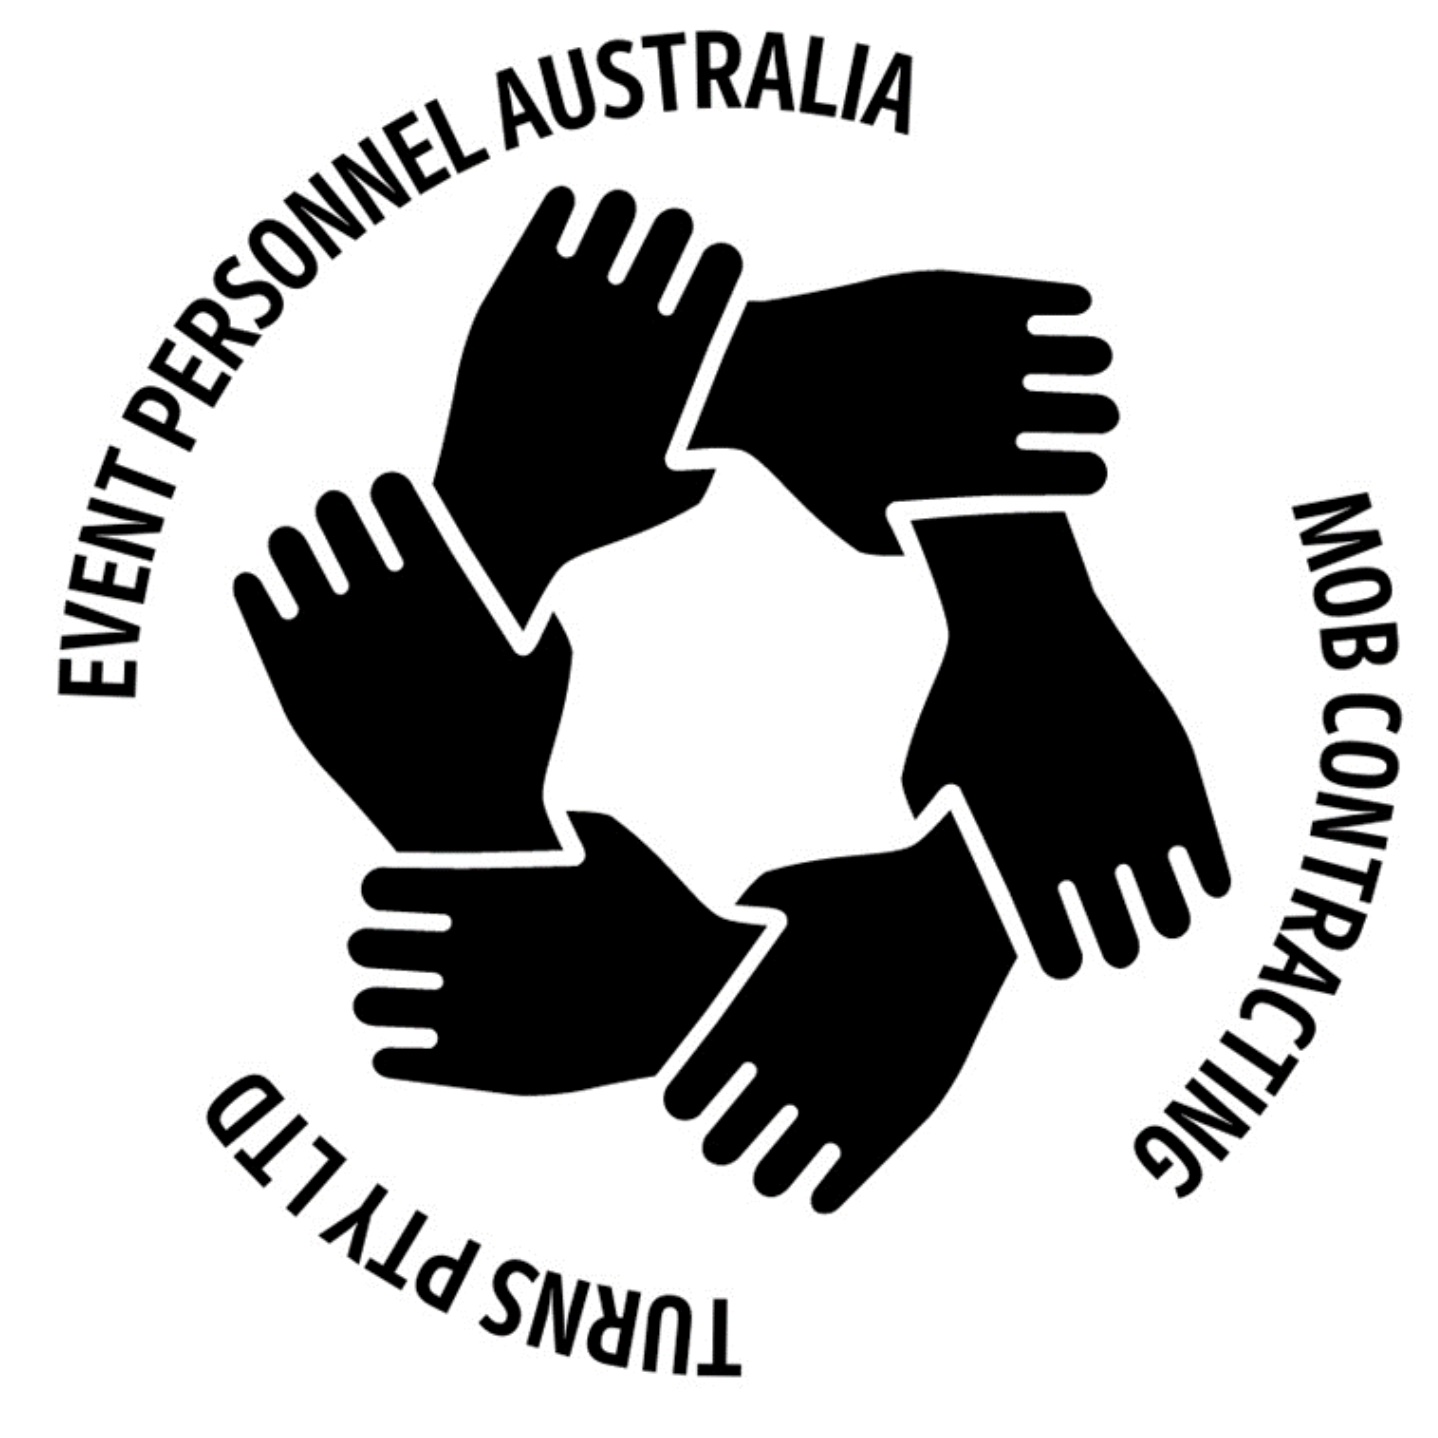 One Mob - Trading as Mob Contracting and Event Personnel Australia logo